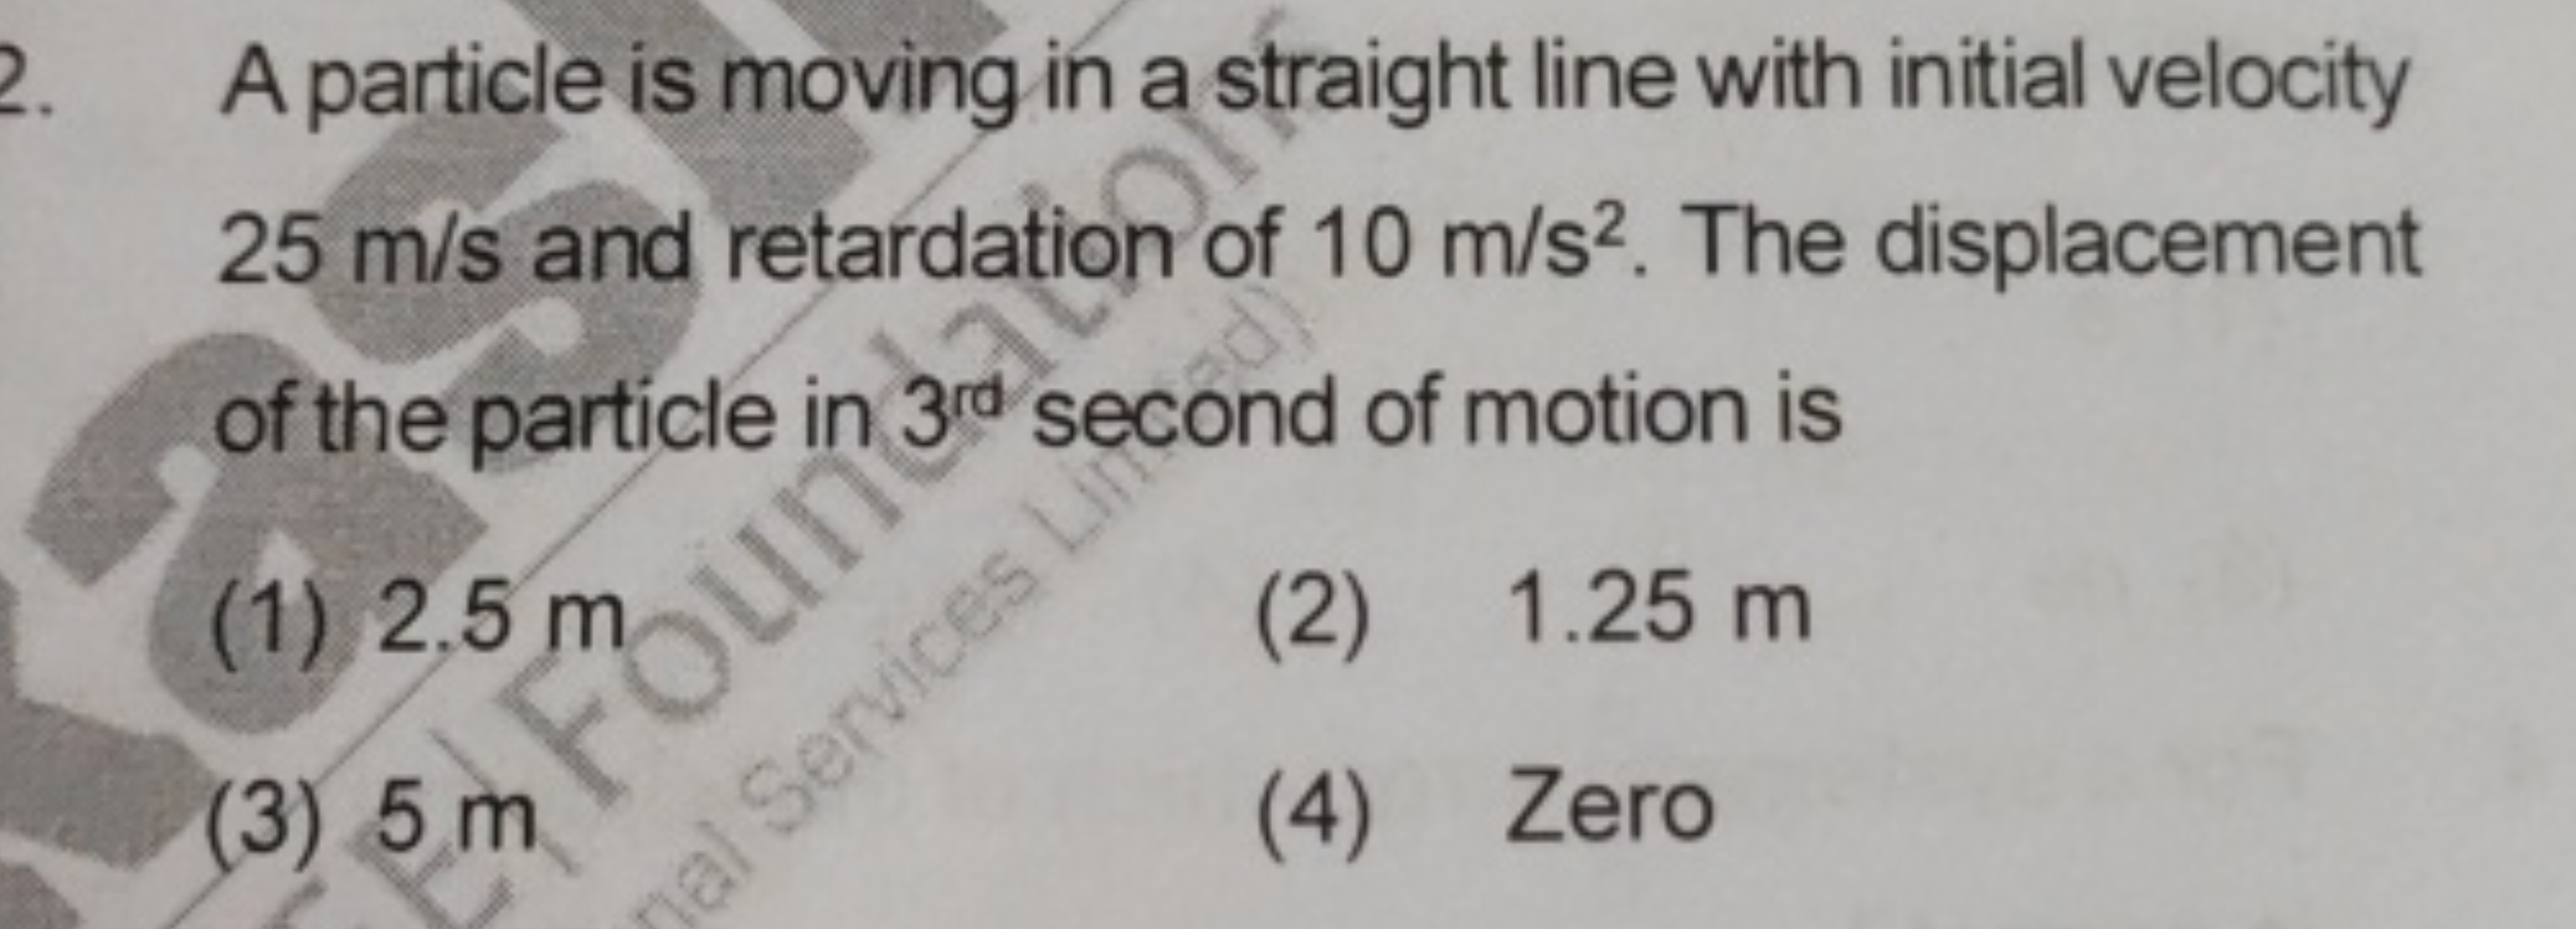 A particle is moving in a straight line with initial velocity 25 m/s a